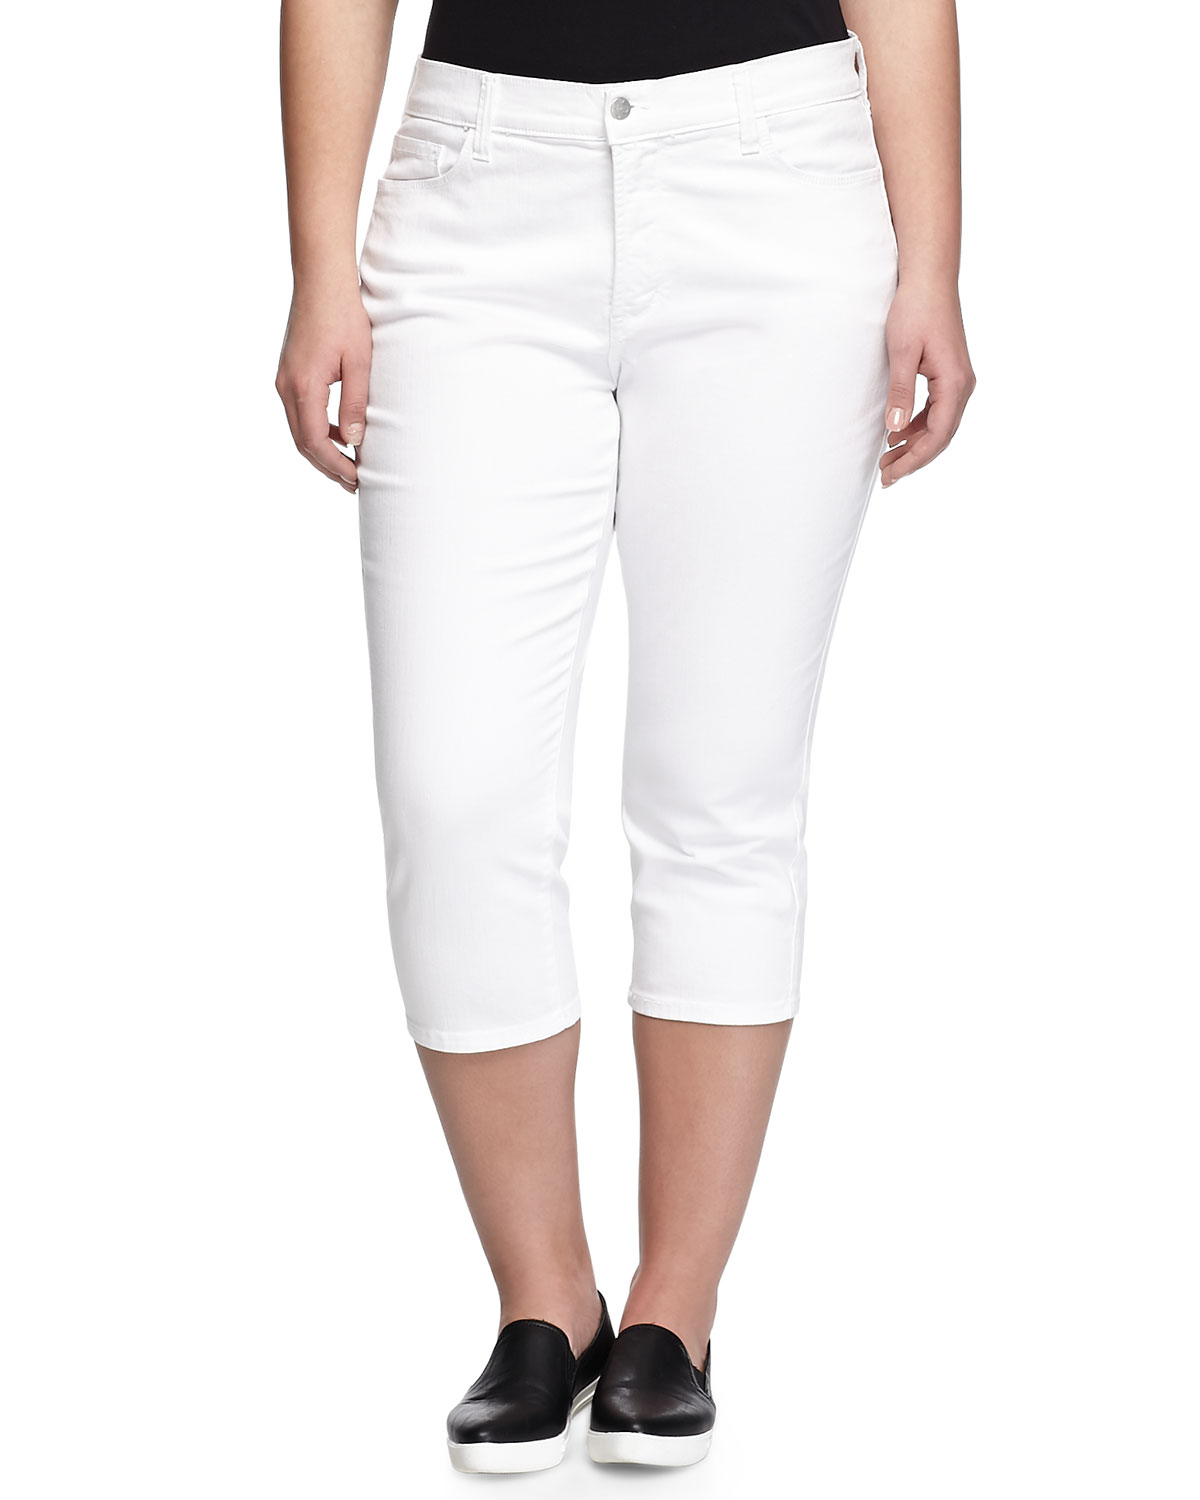 Lyst - NYDJ Ariel Cropped Jeans, Optic White in White